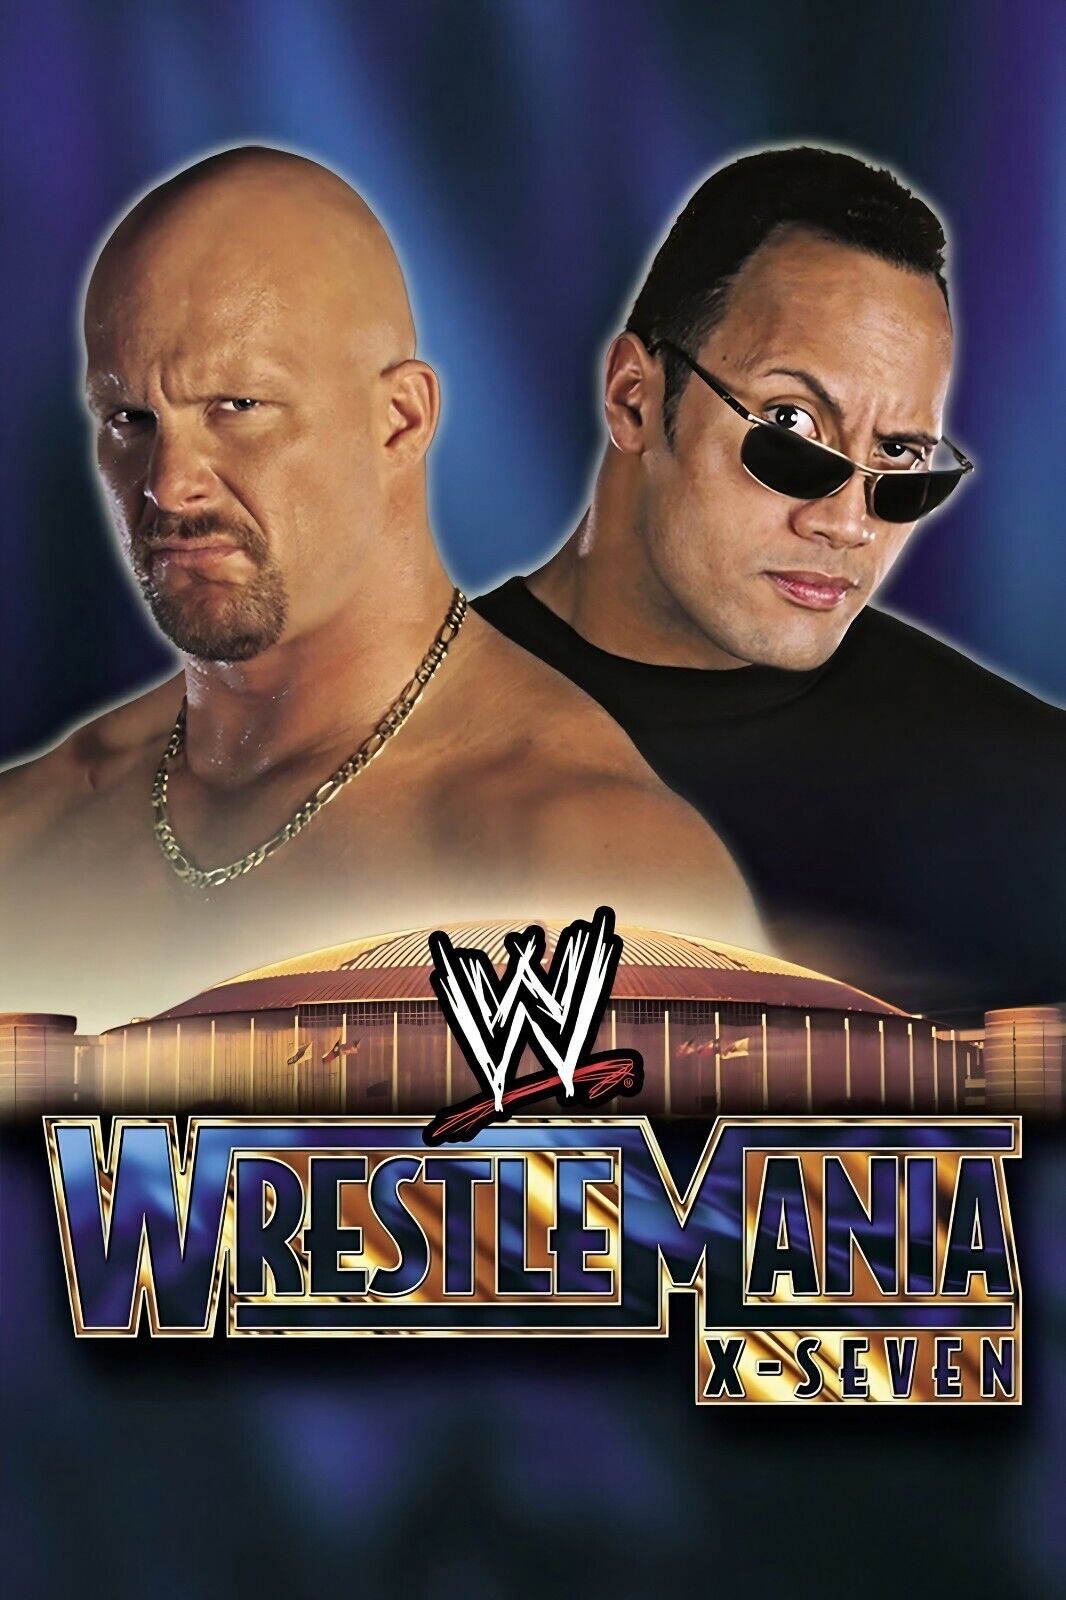 WWF Wrestlemania 17 Poster (2001) - 11x17 Inches | NEW USA